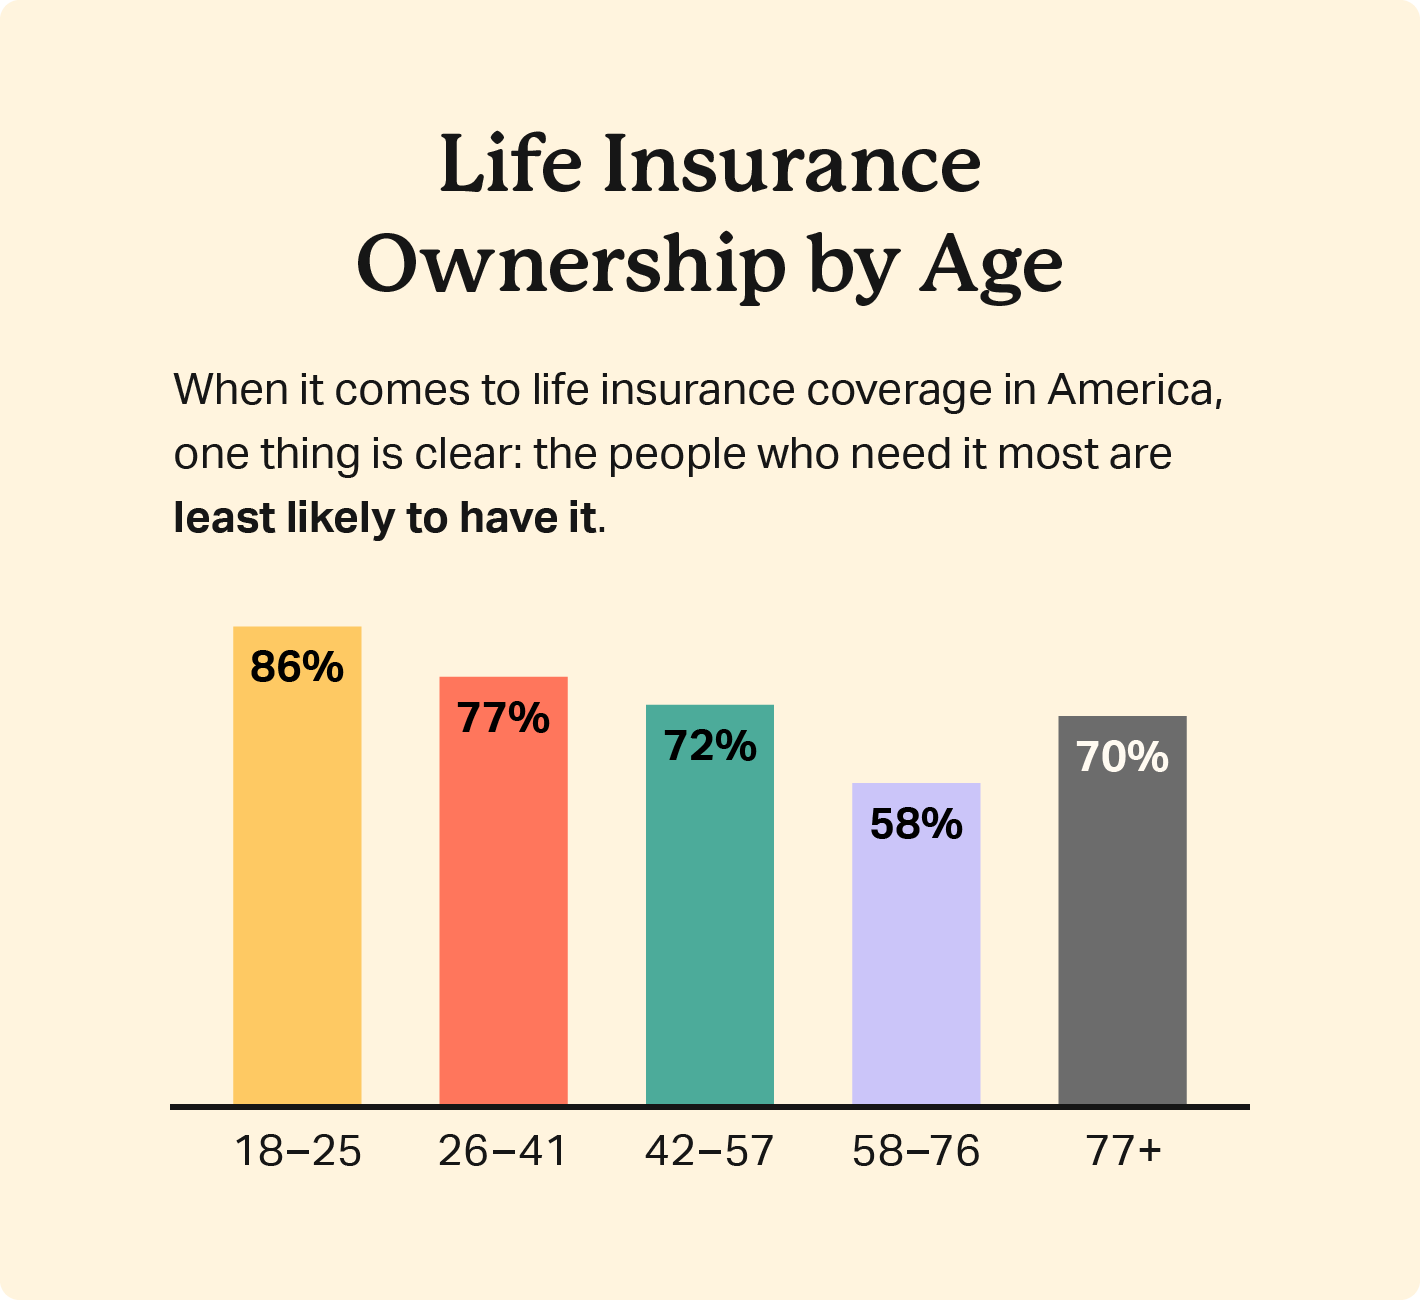 A bar graph compares life insurance ownership by age, showing 58-76 year olds are least likely to own life insurance at 58%.